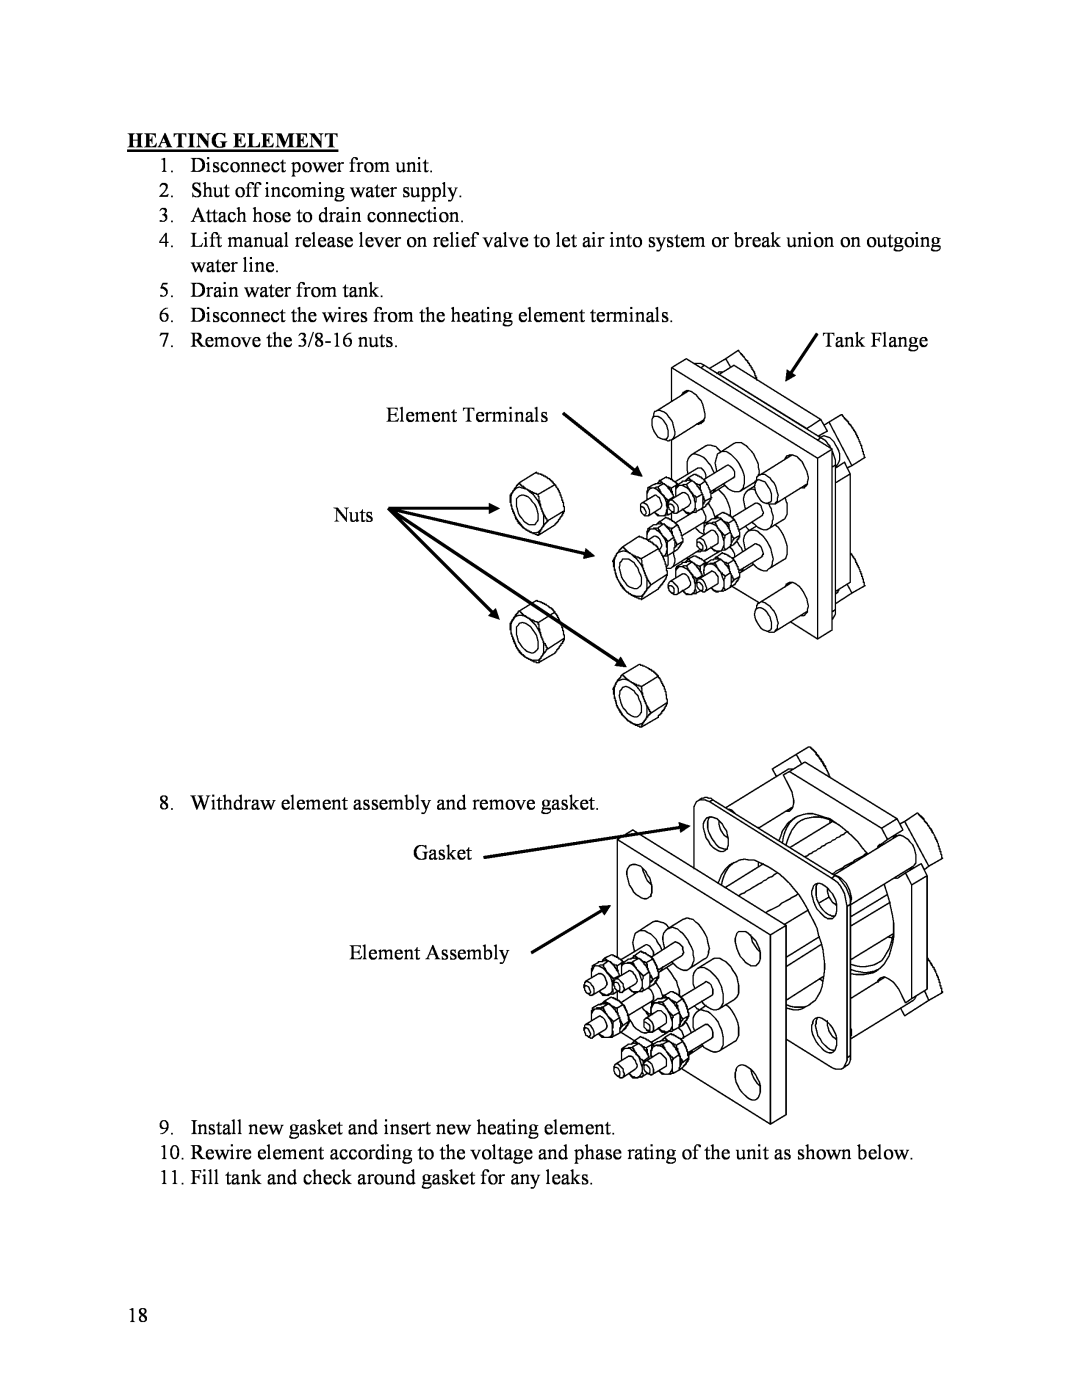 Hubbell Electric Heater Company manual Heating Element, Disconnect power from unit 